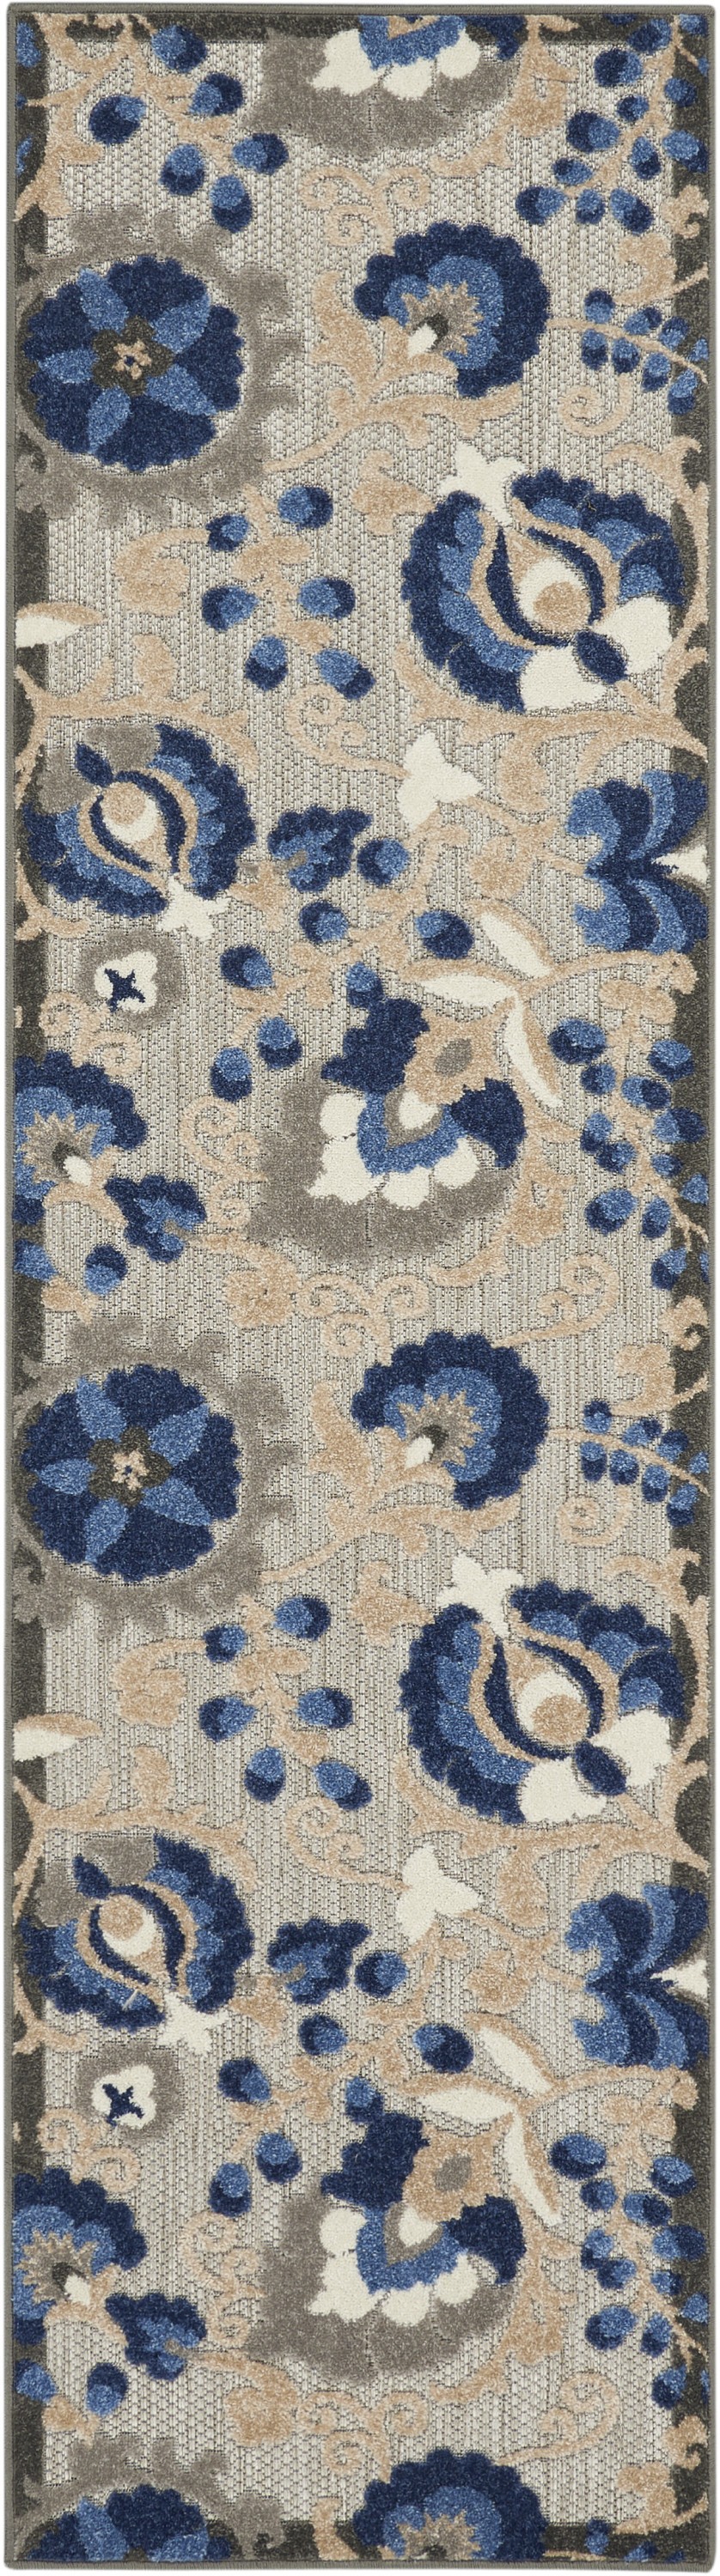 2' X 10' Blue And Gray Floral Indoor Outdoor Area Rug-384854-1